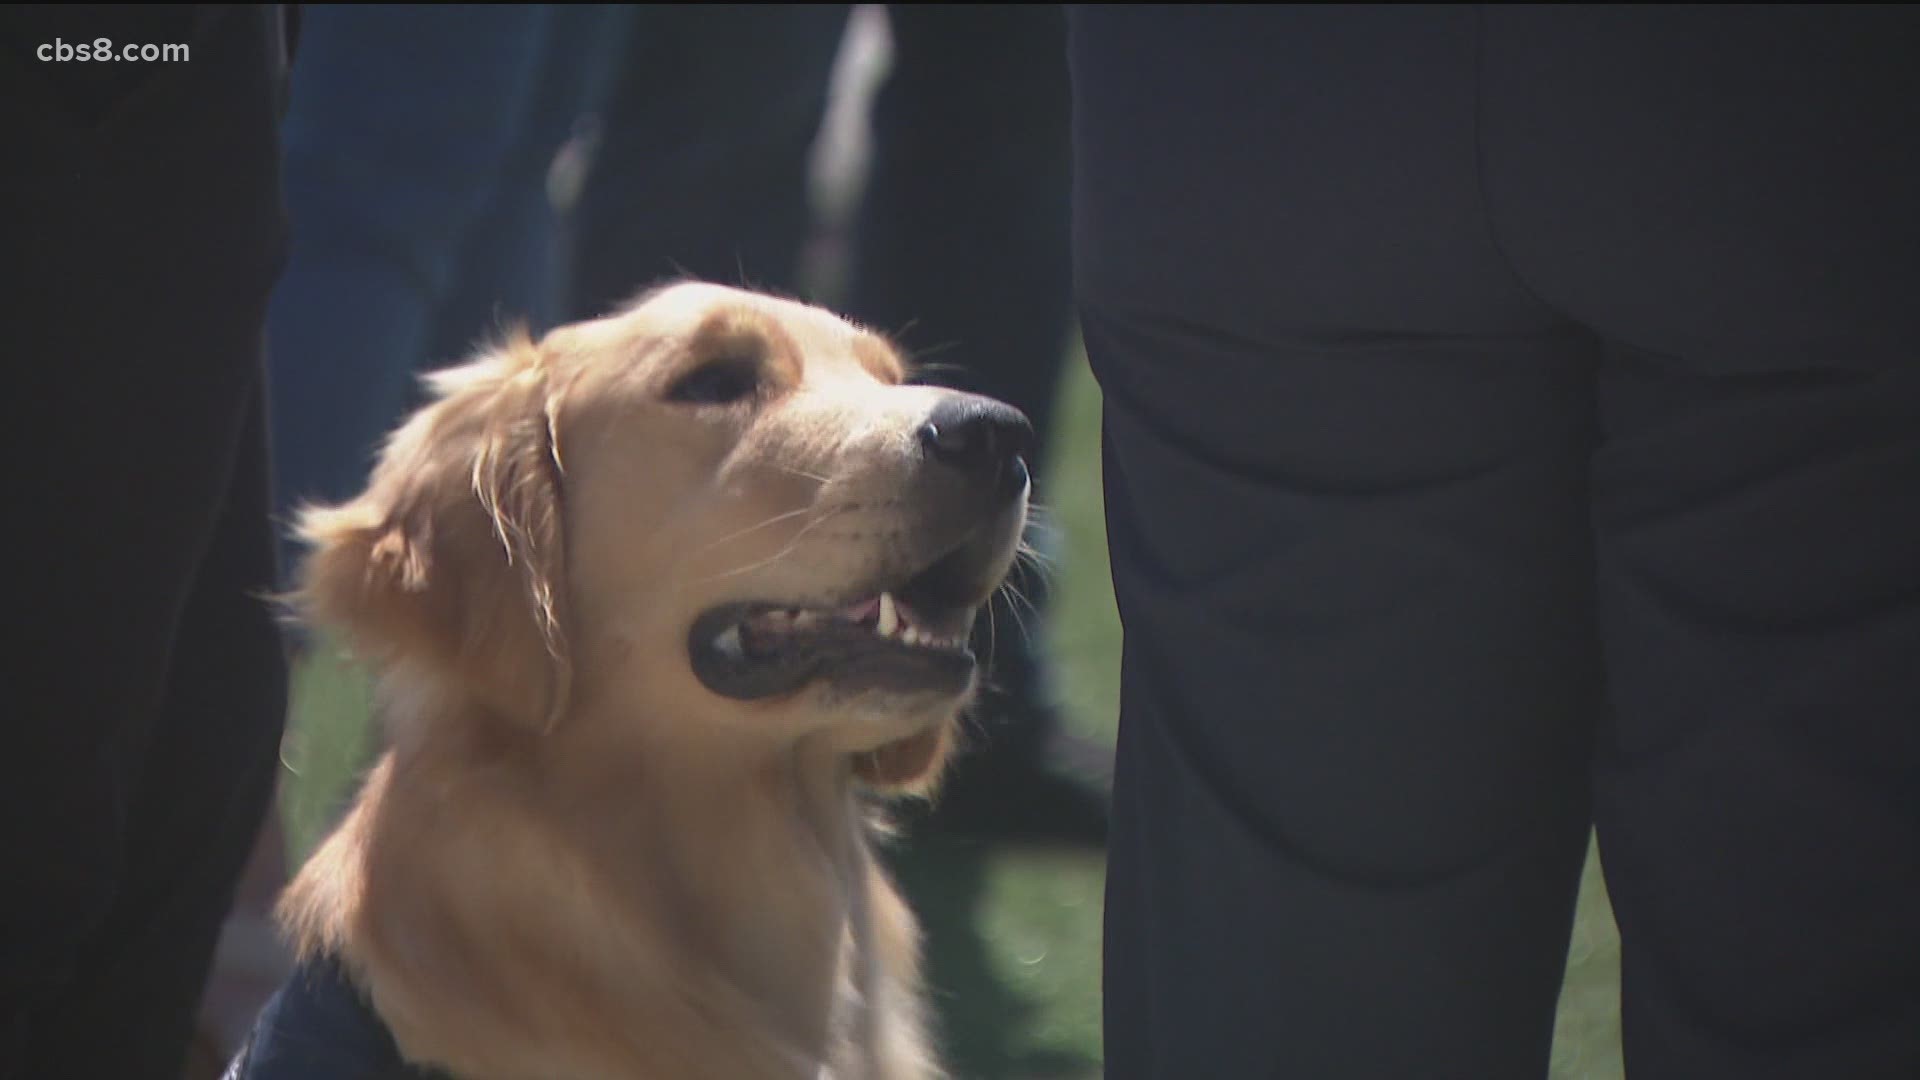 Hudson, the one and a half year old golden retriever, will work out of the Modesto Fire Department.